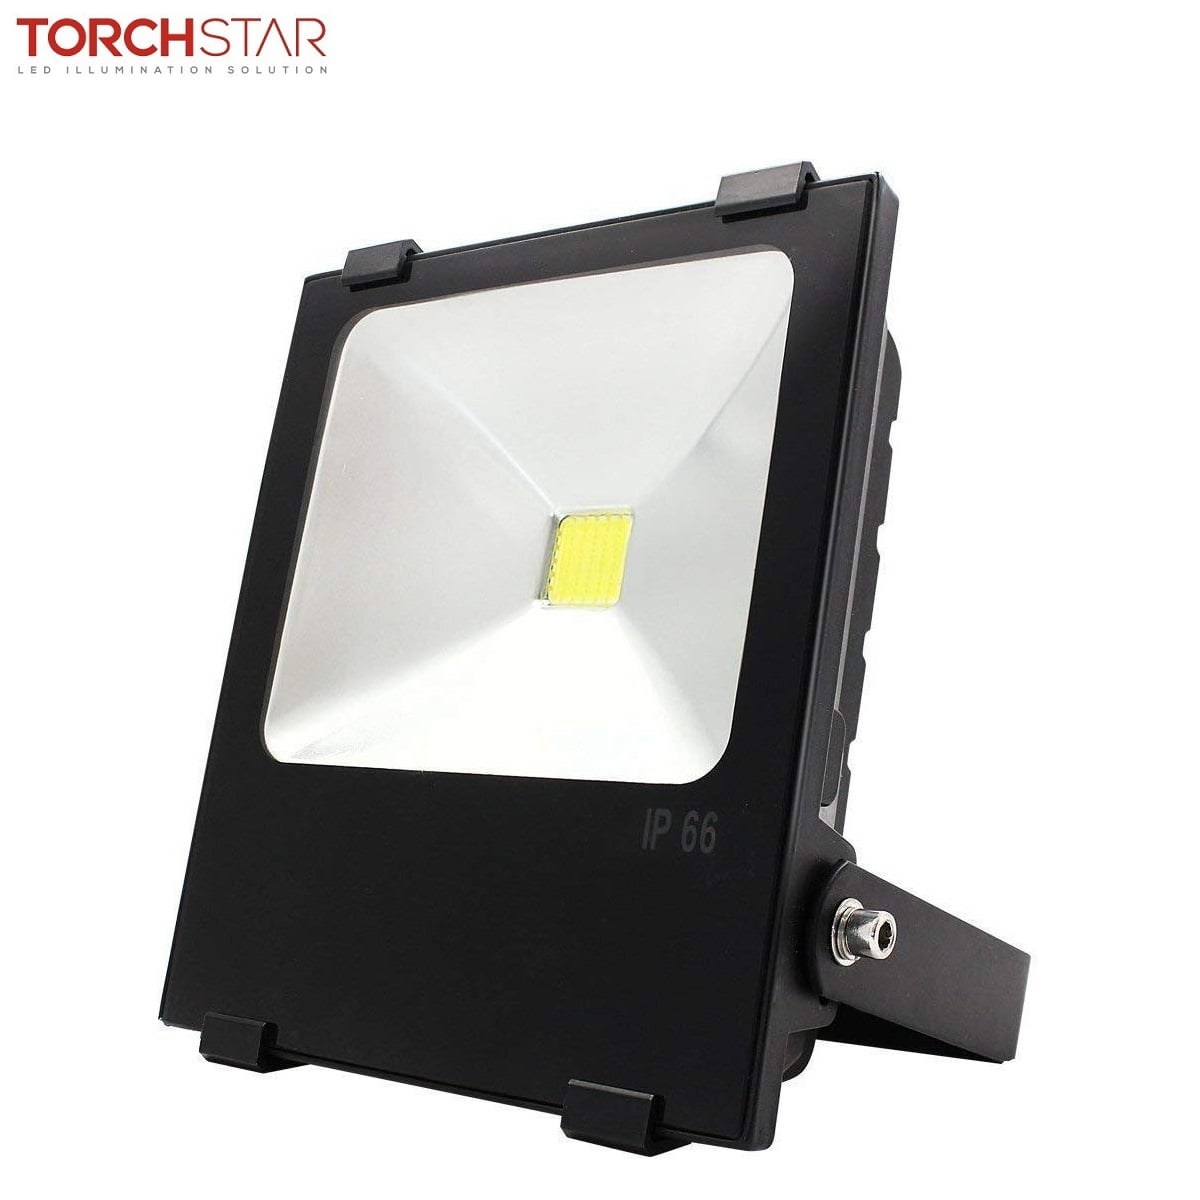 50W Outdoor IP44 Security LED Wall Floodlight Garden Motion Light Cool White 